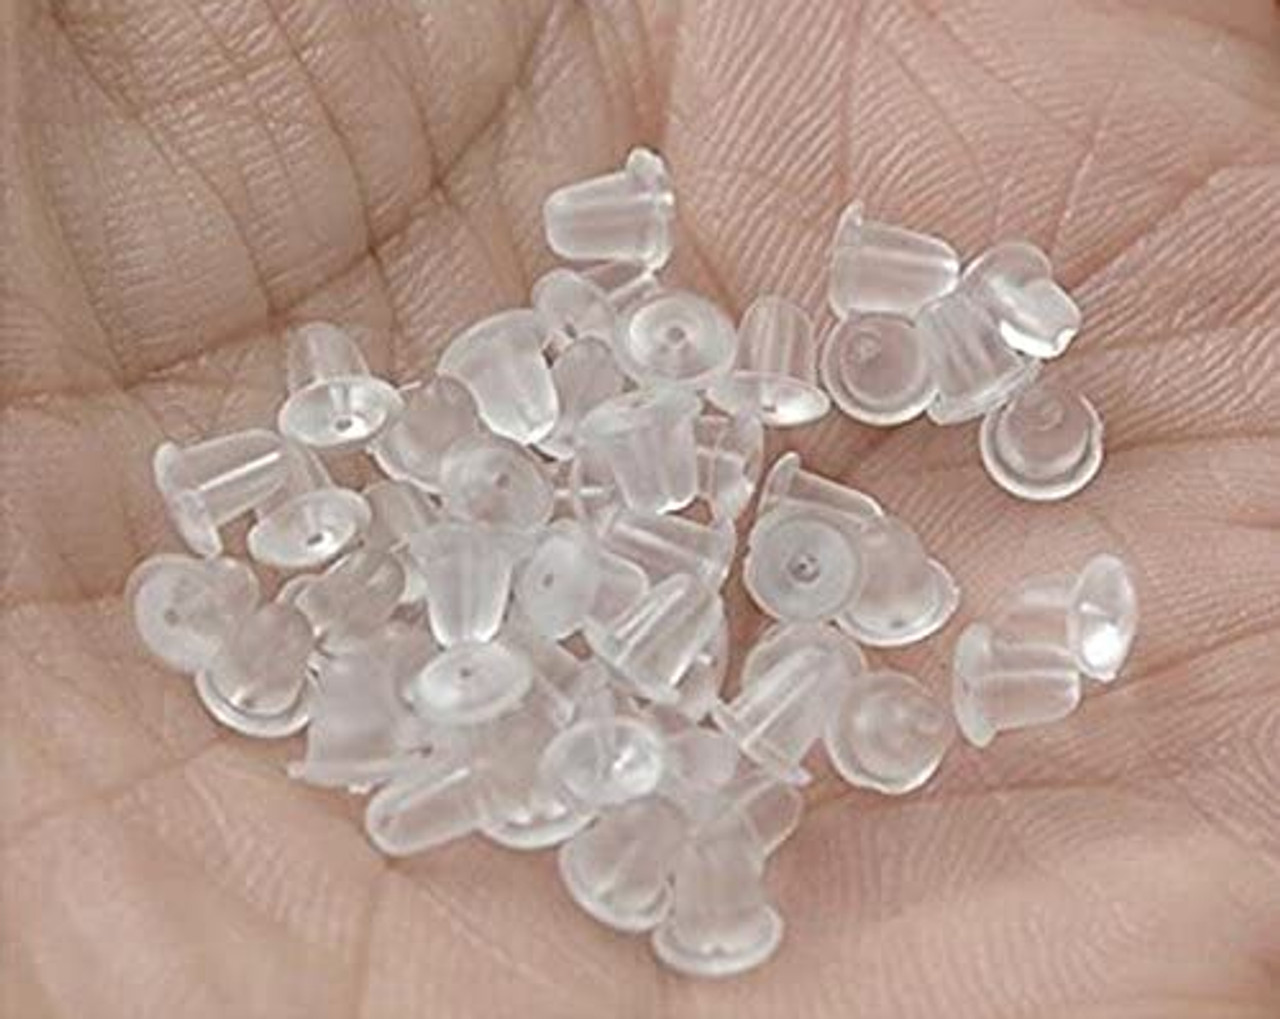 100pcs Earring Backs Silicone Cushions Safety Backs For Fish Hook Earrings  Stud Earrings Drop Earrings Replacement Earring Backs For Clutch Earring  Backs With Storage Box